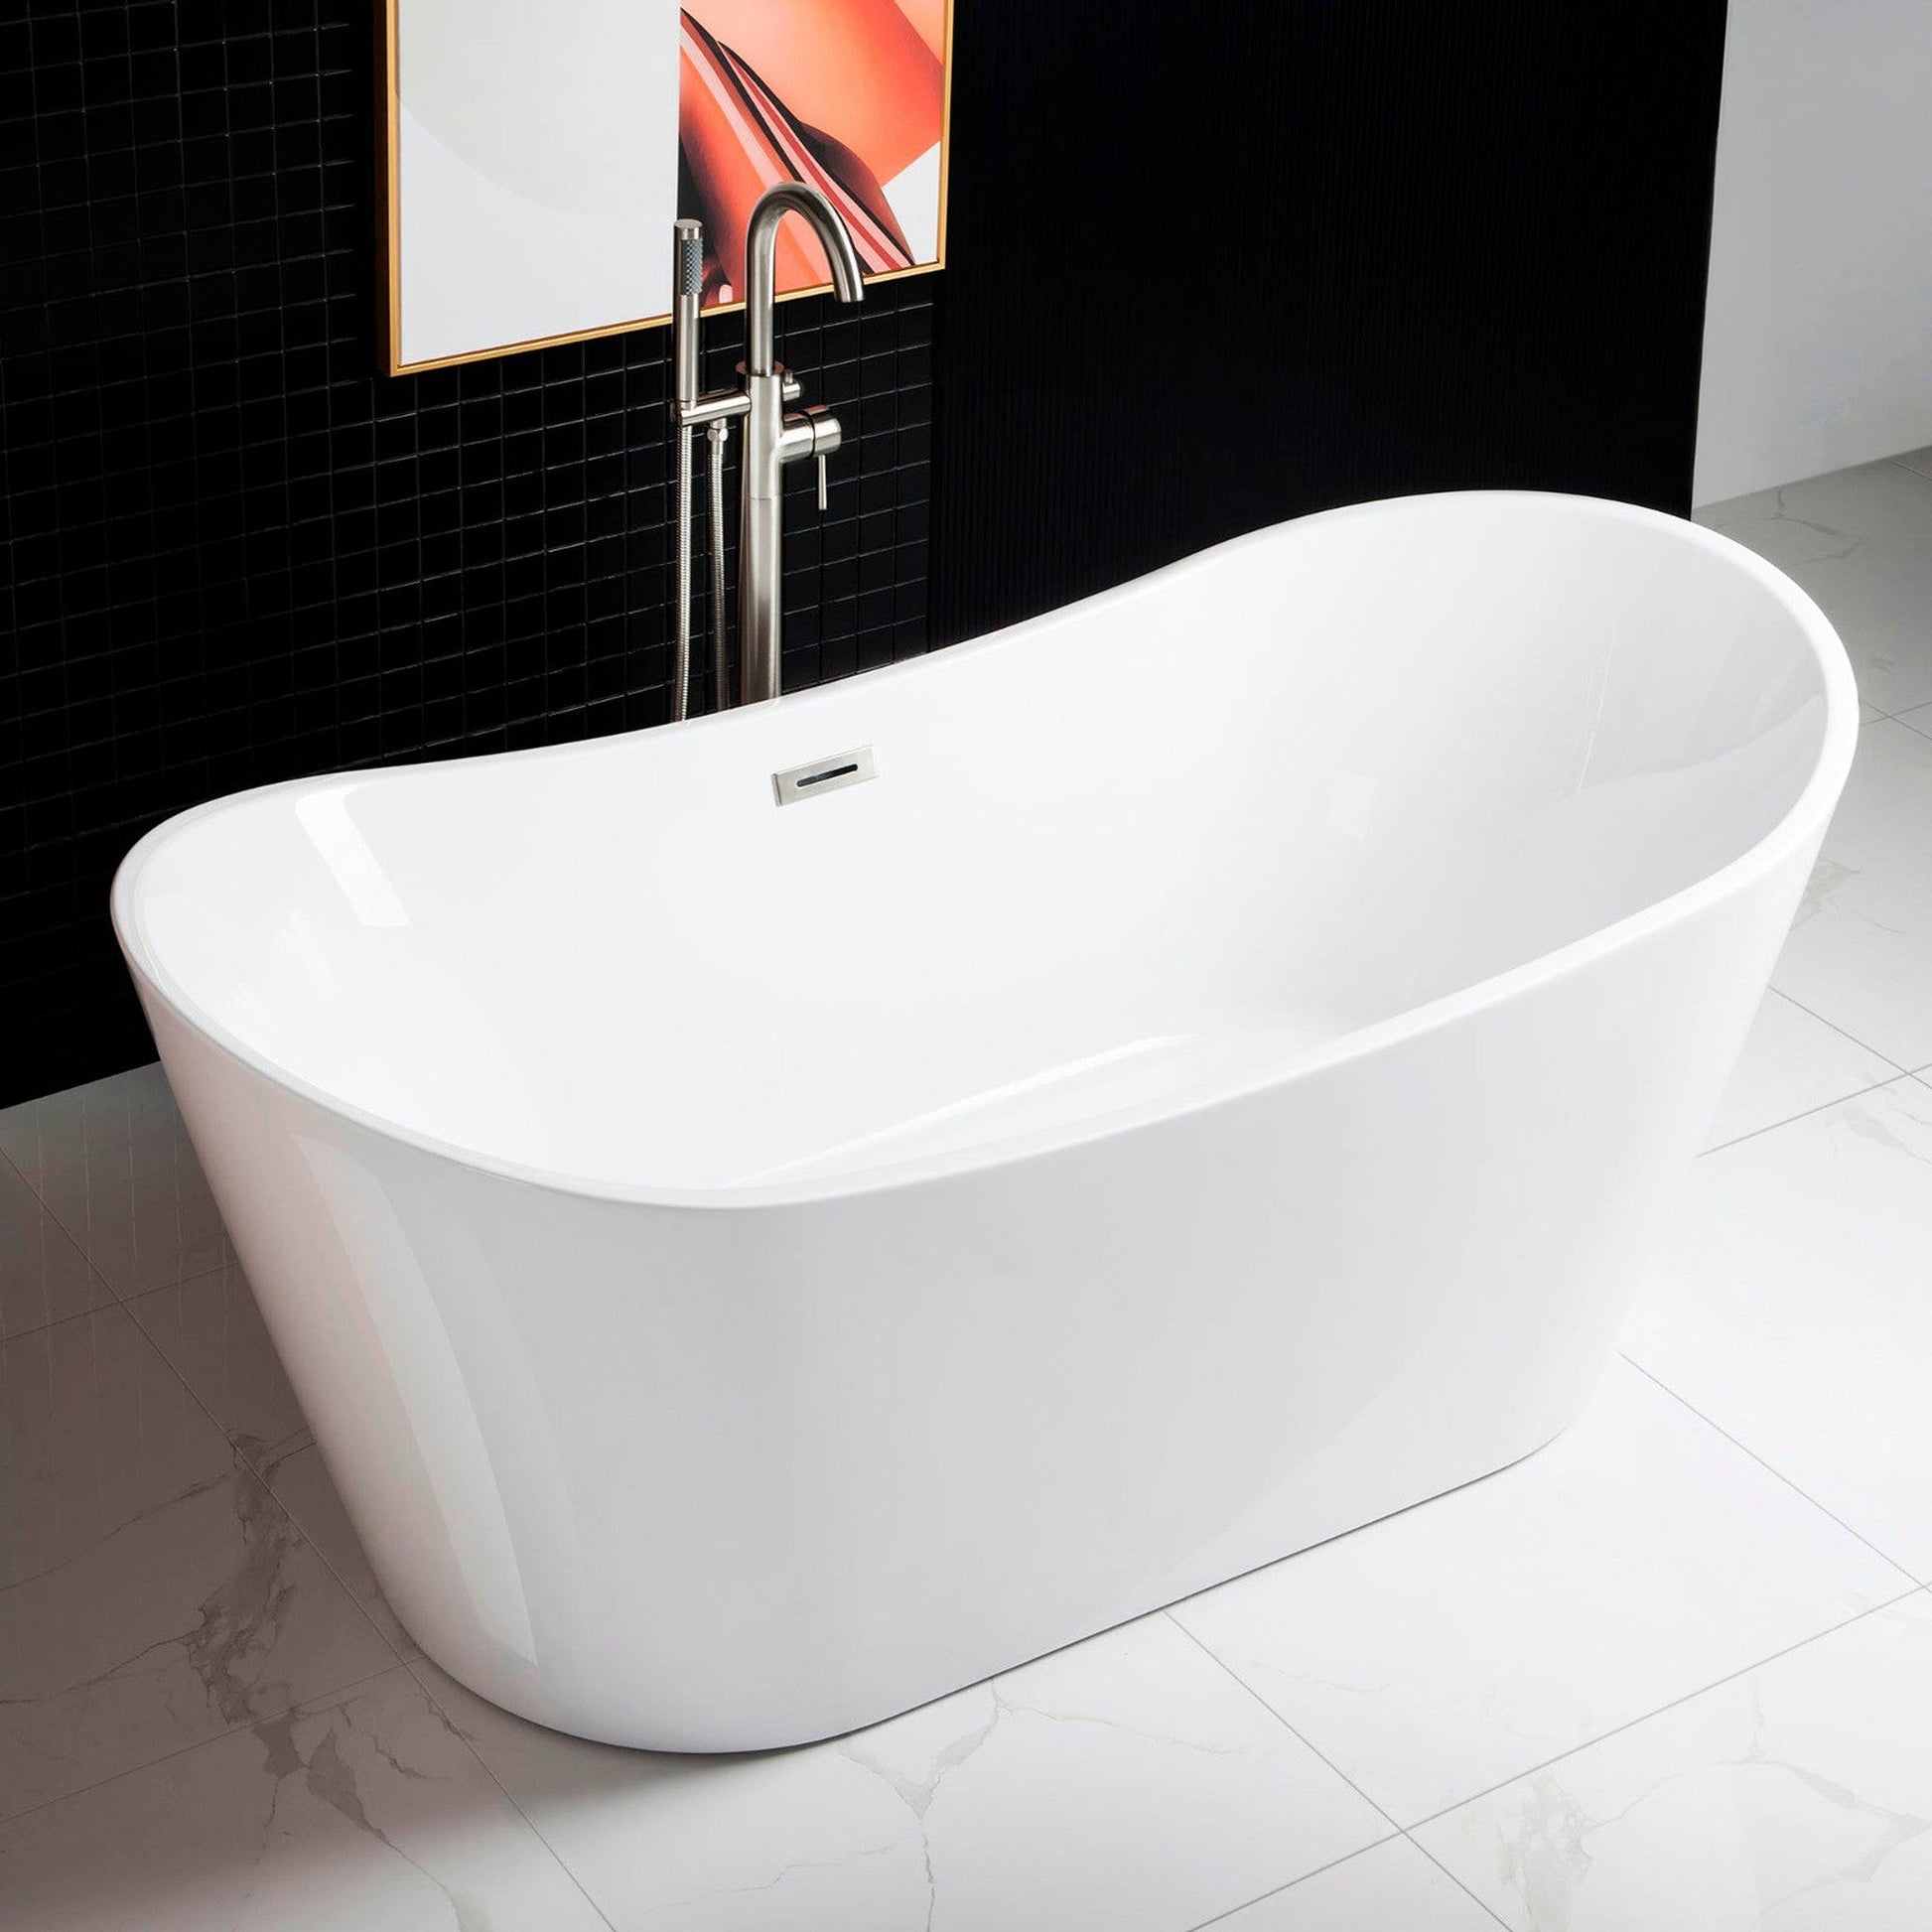 WoodBridge B0010 67" White Acrylic Freestanding Contemporary Soaking Bathtub With Chrome Drain, Overflow, F0071CHVT Tub Filler and Caddy Tray